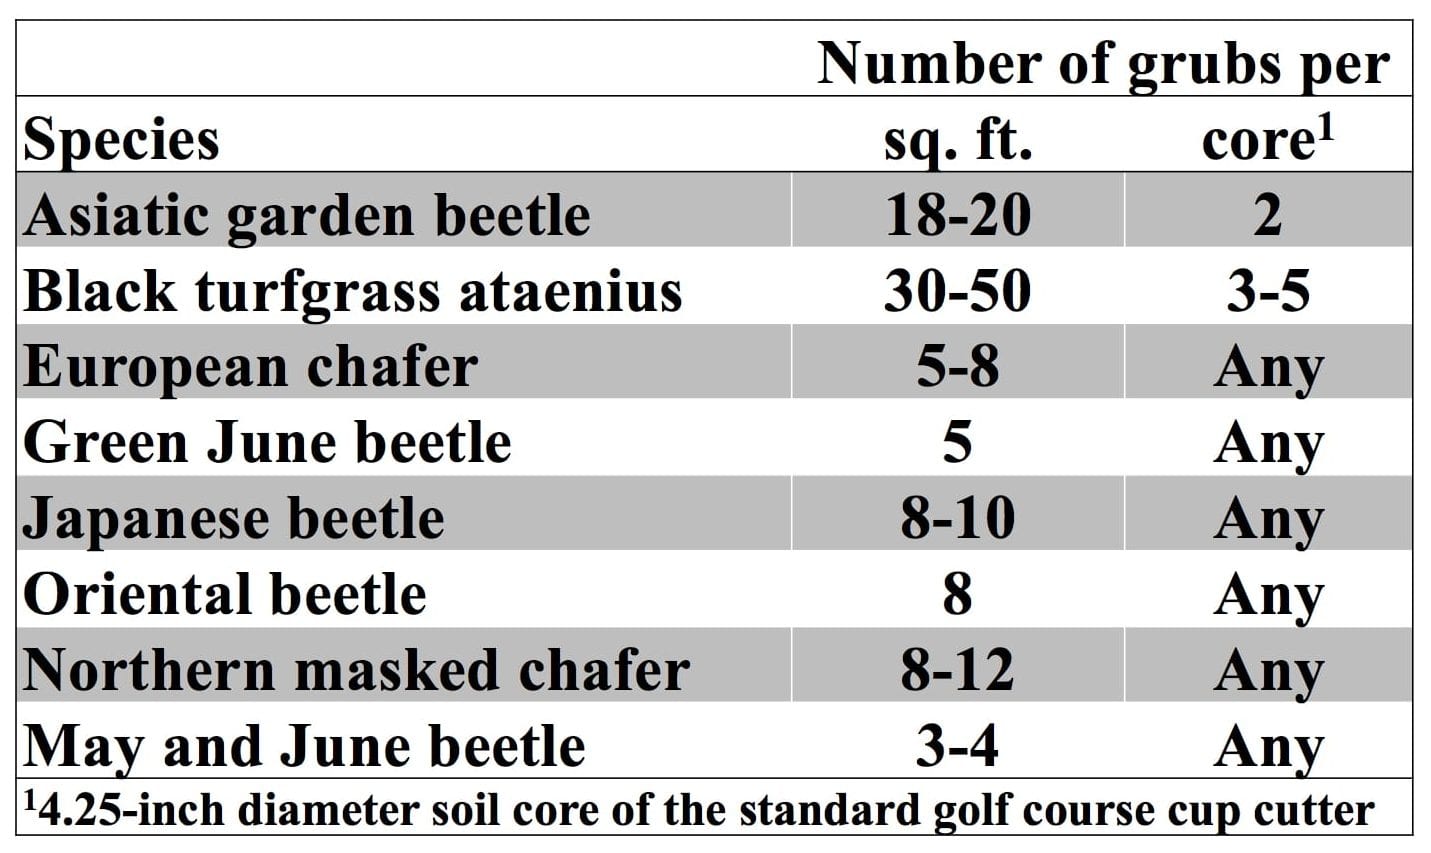 Number of grubs of each species before a treatment is justified